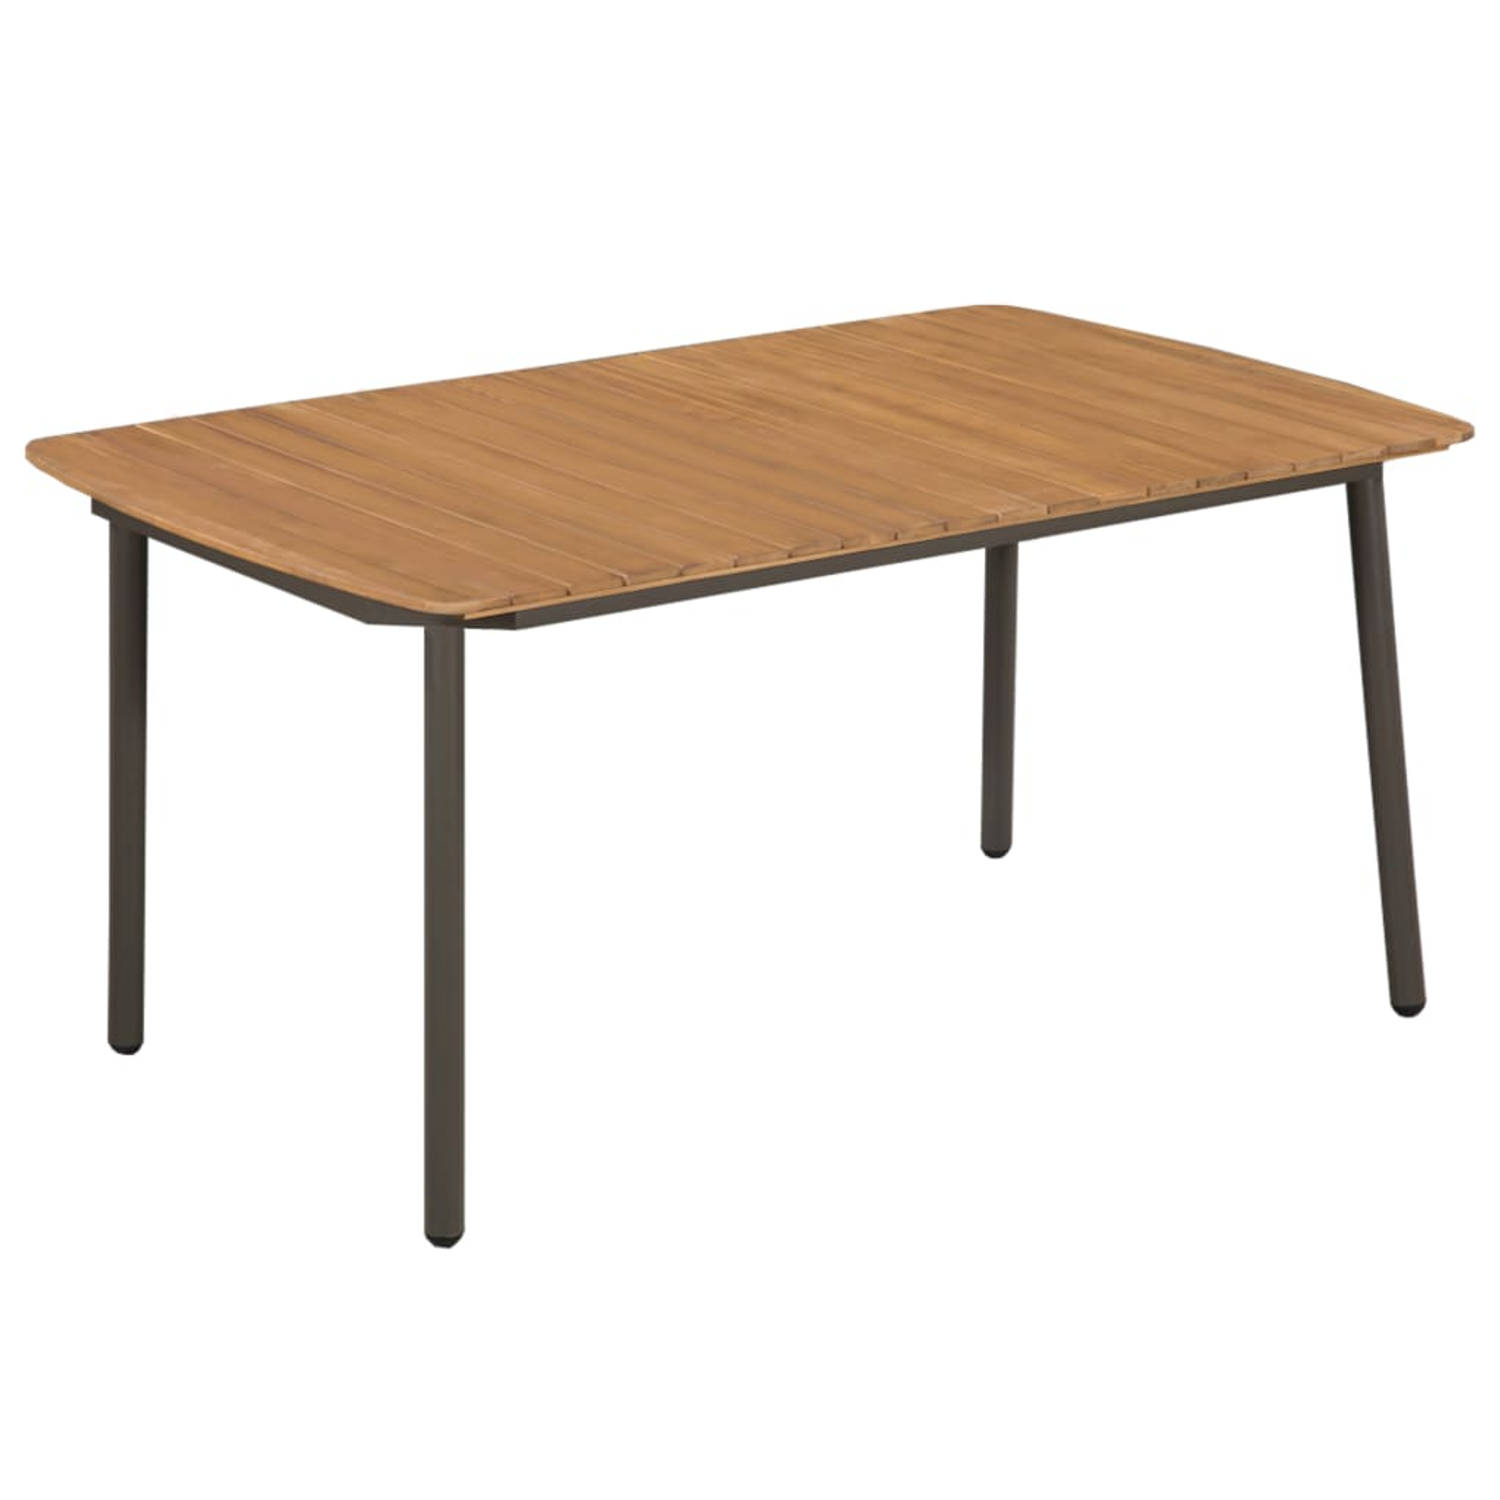 The Living Store Tuinset - Acaciahout/Staal - Tafel- 150x90x72cm - Stoel- 55.5x53.5x95cm - Zwart